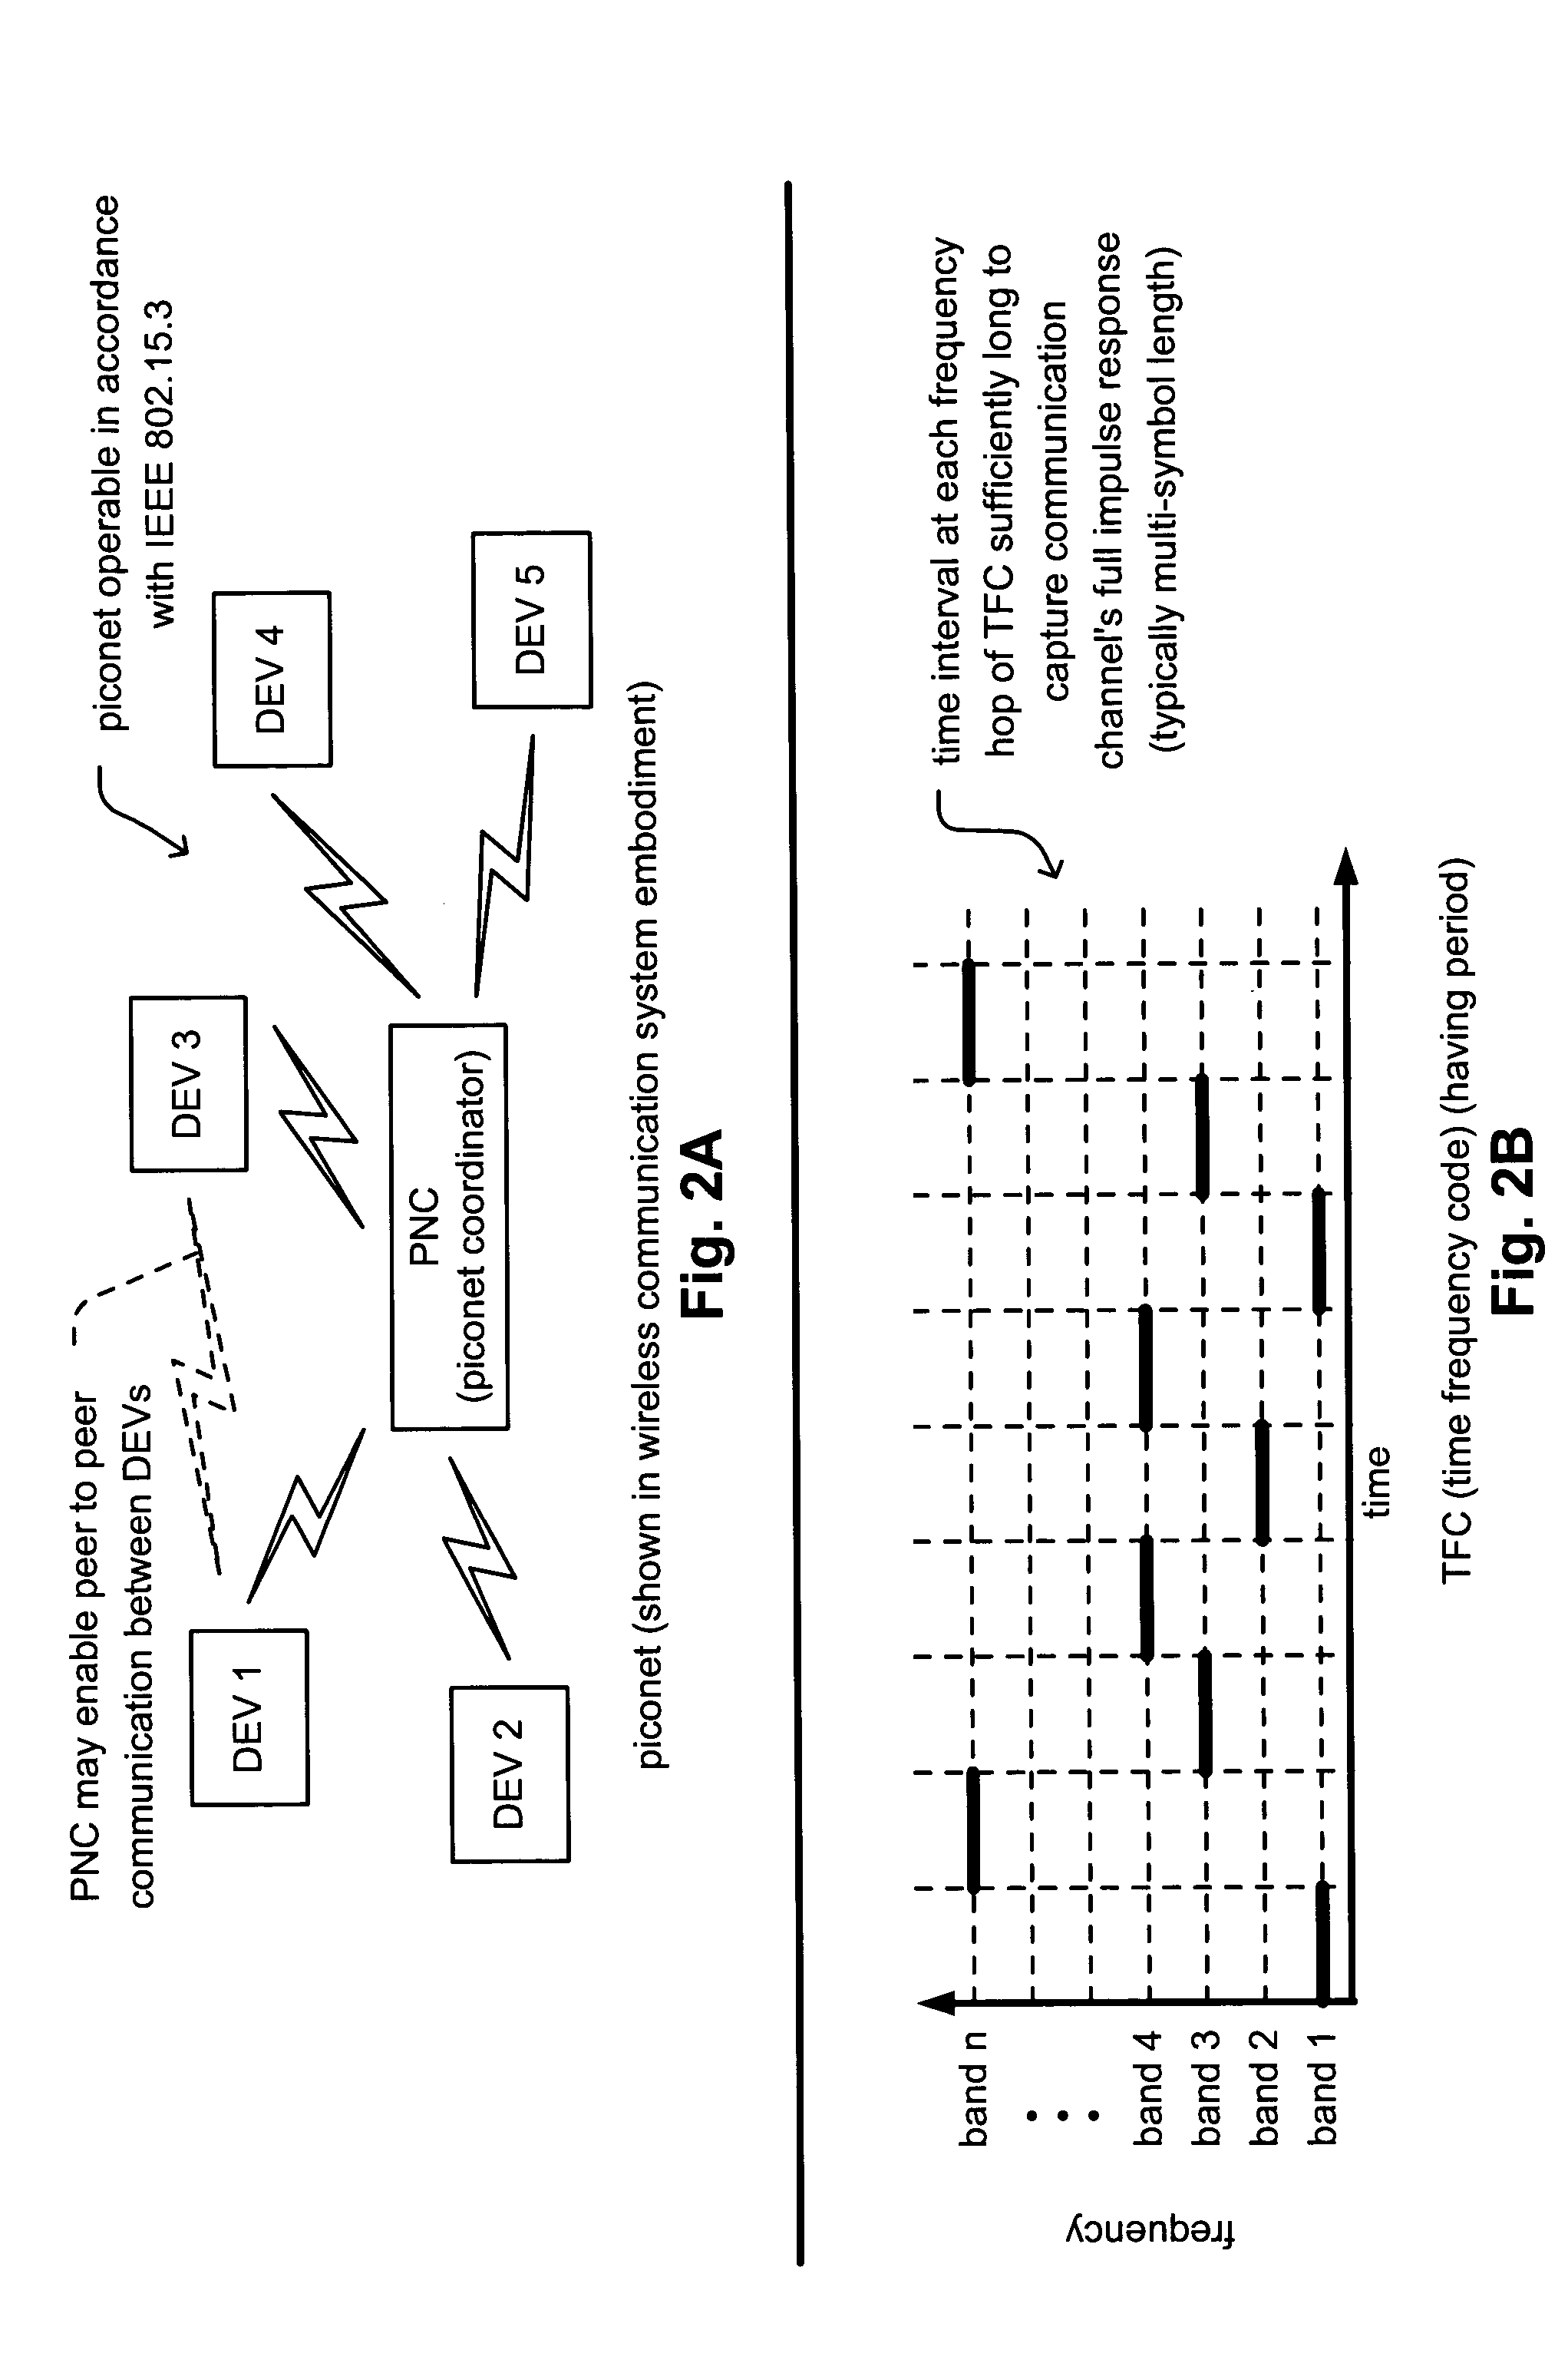 Position based WPAN (Wireless Personal Area Network) management